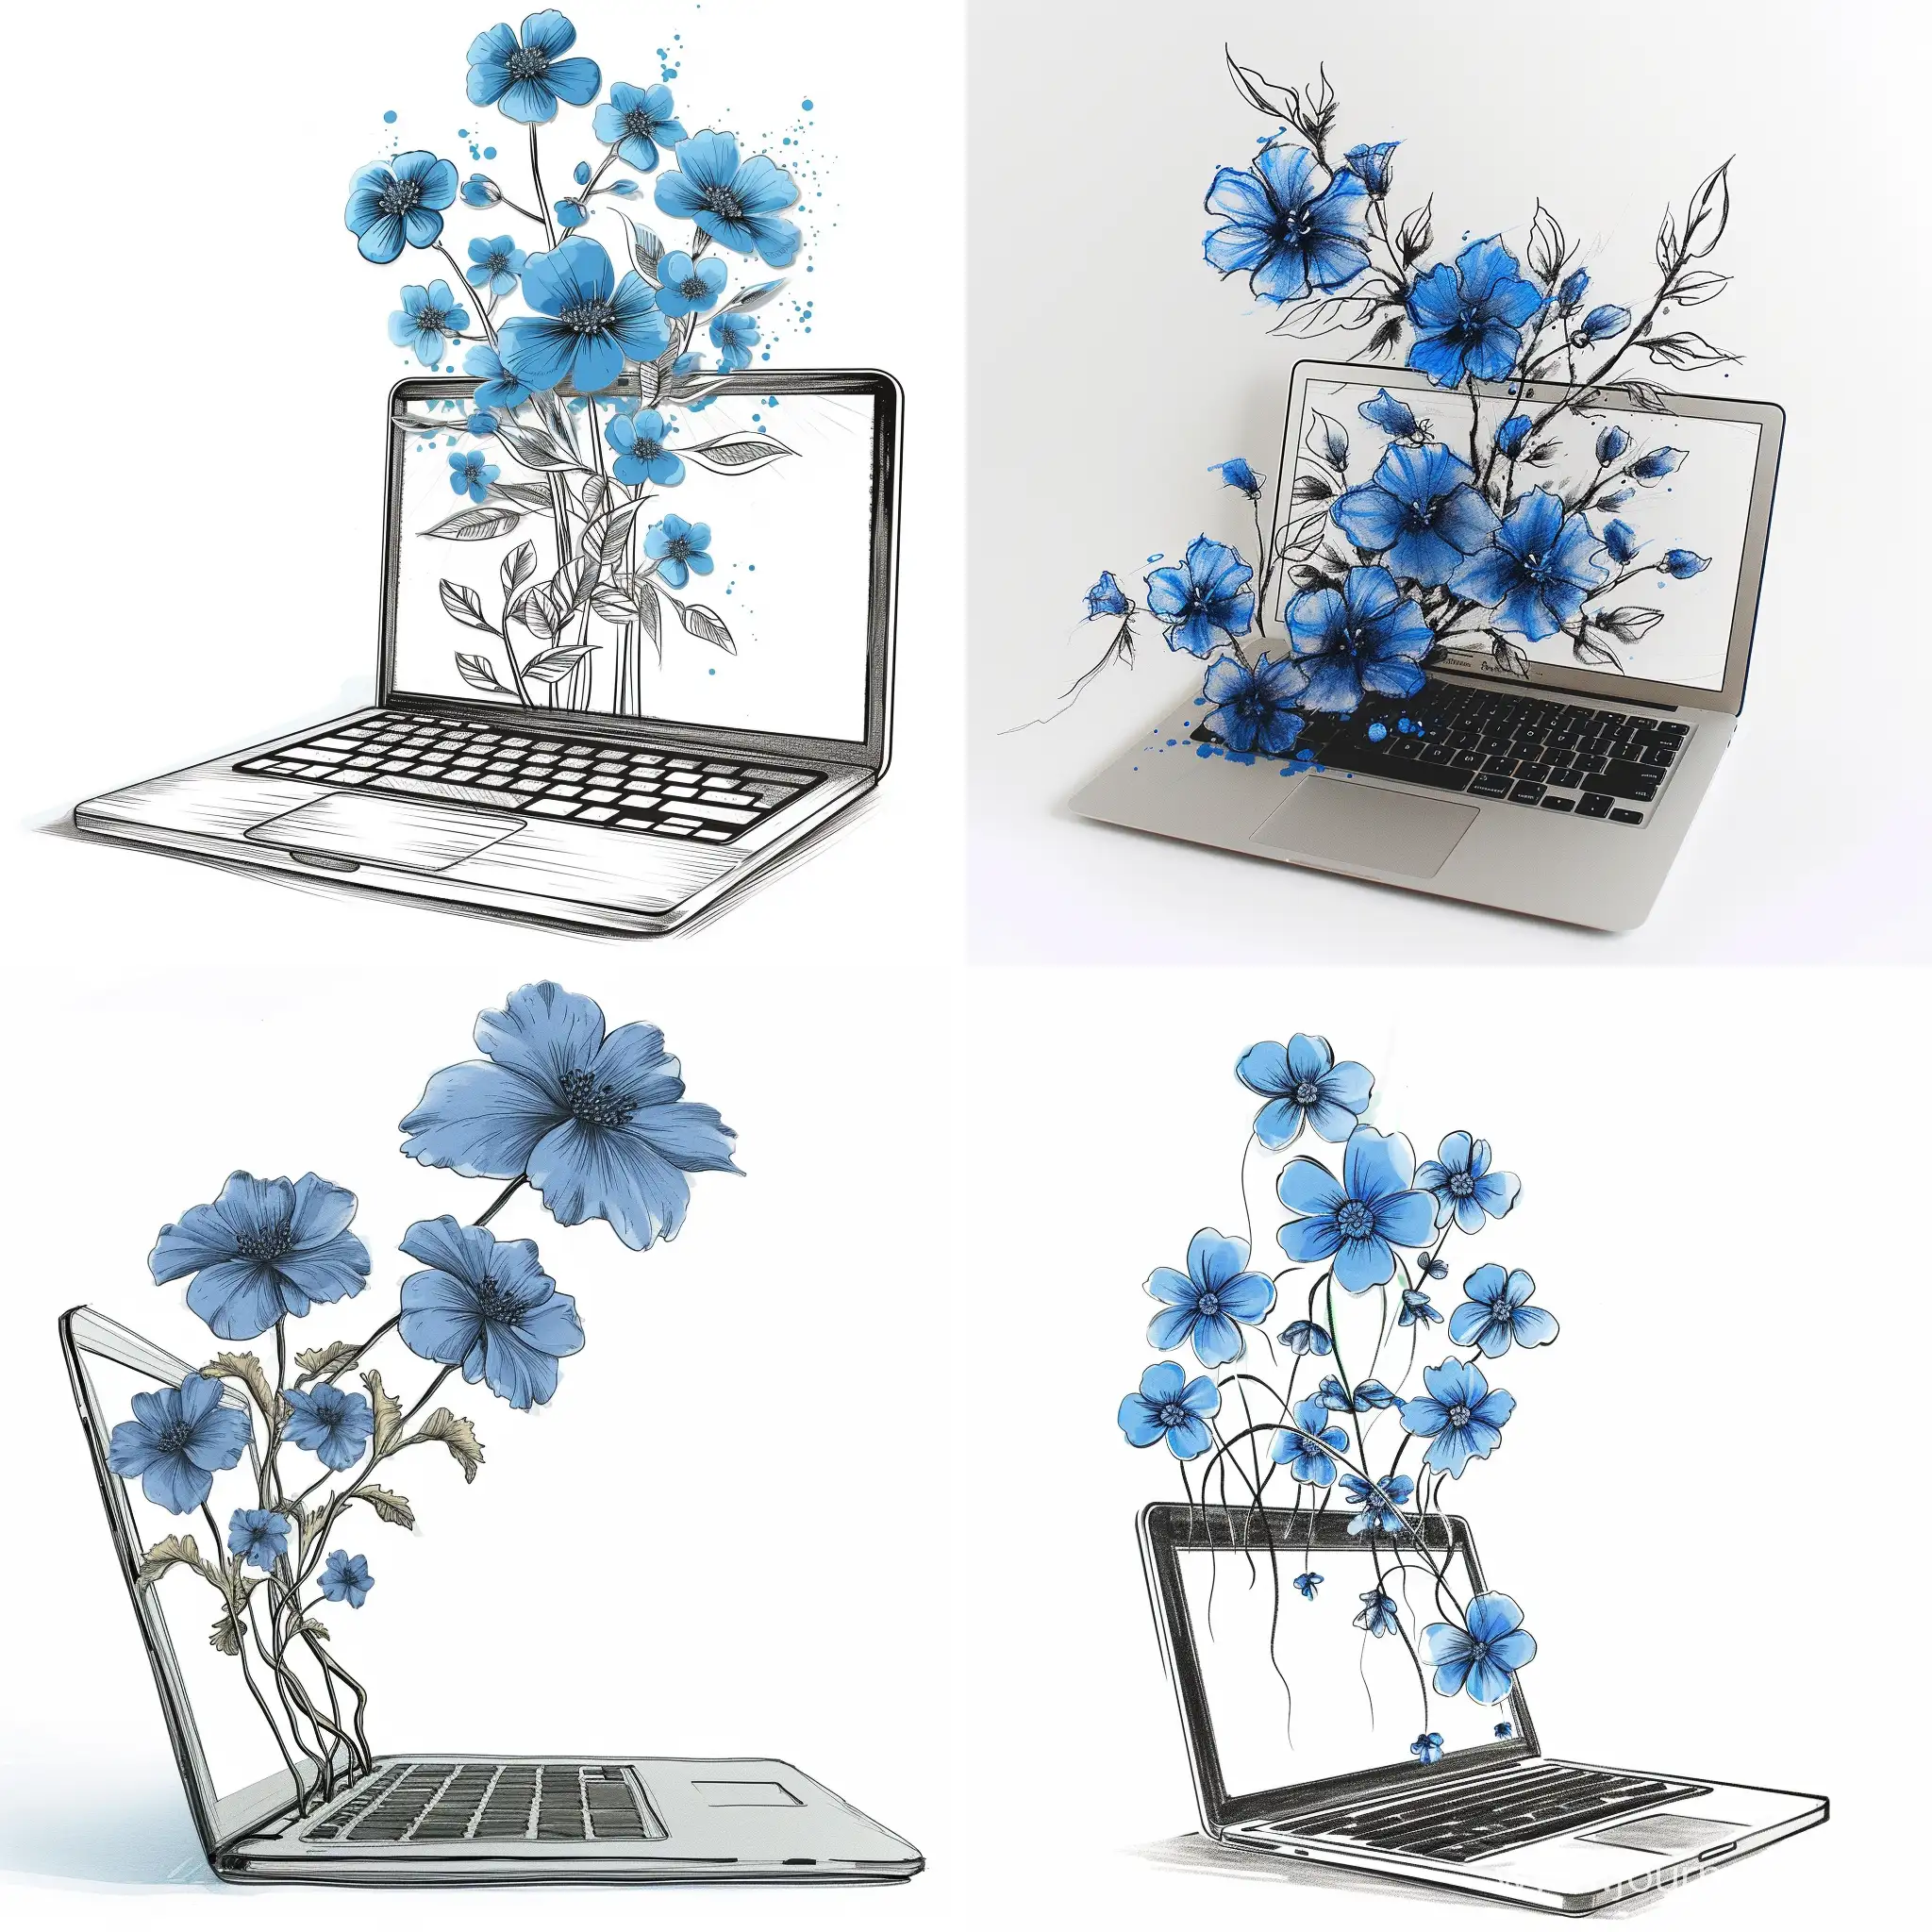 Victors-Laptop-Illustration-Blue-Flowers-in-Sketch-Drawing-Style